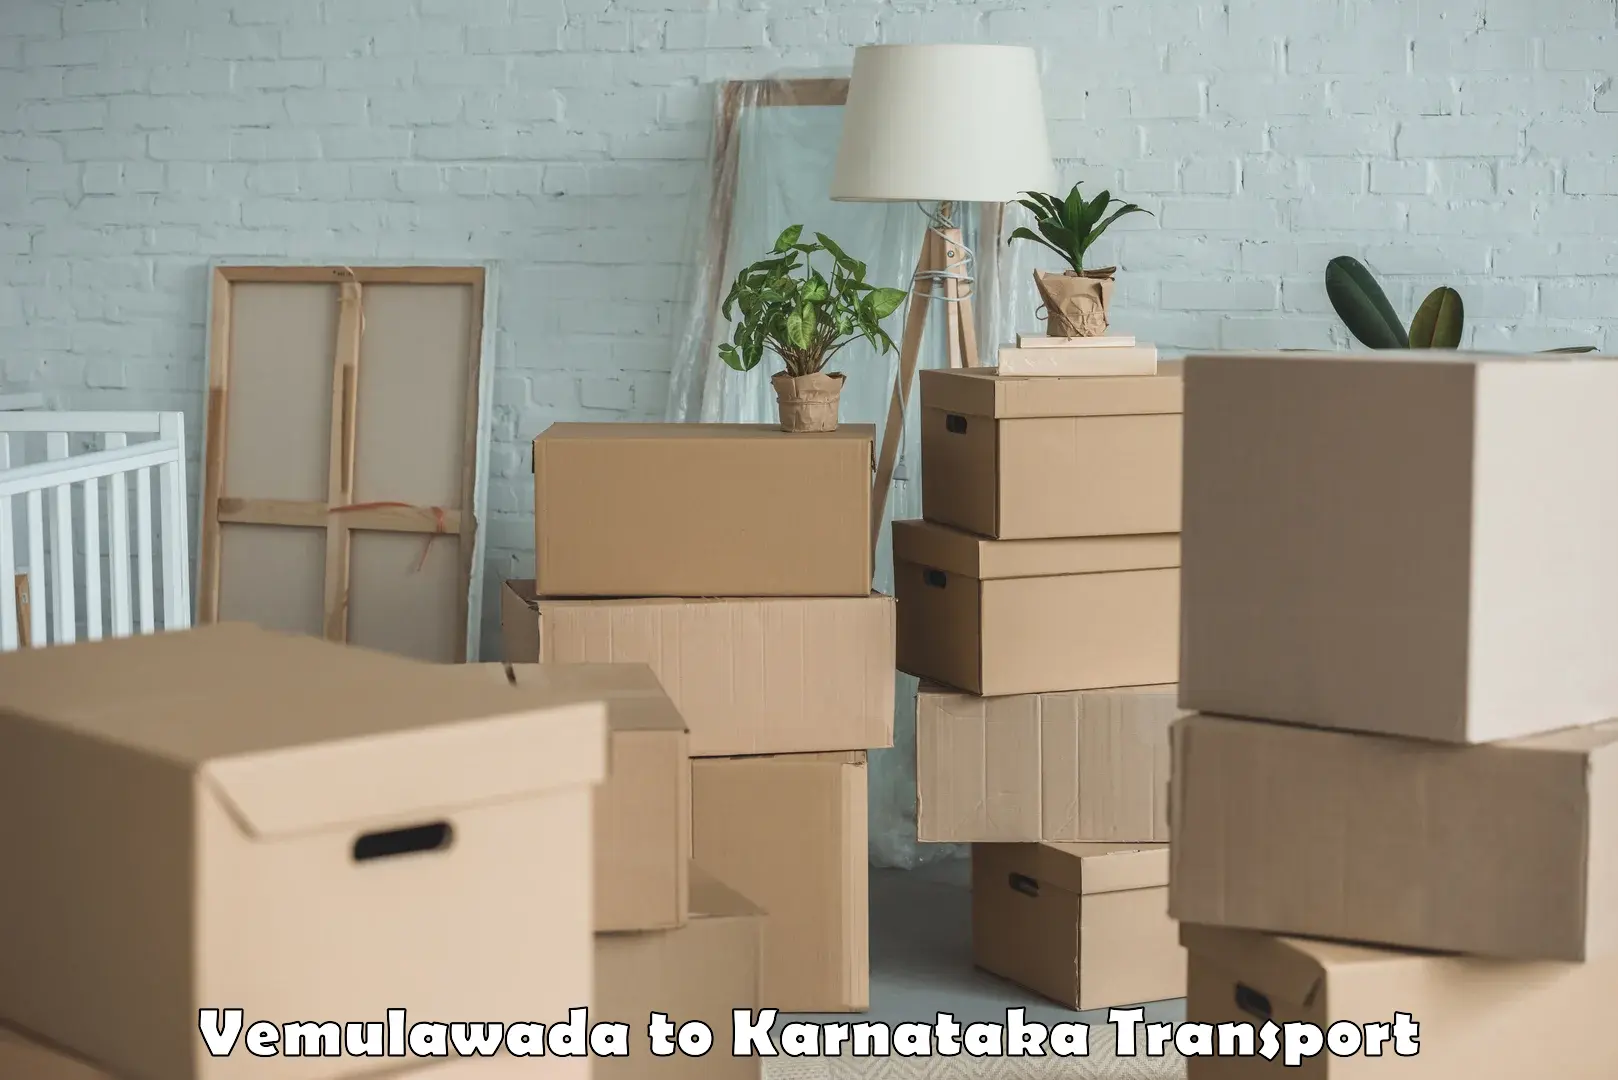 Part load transport service in India Vemulawada to Yellapur